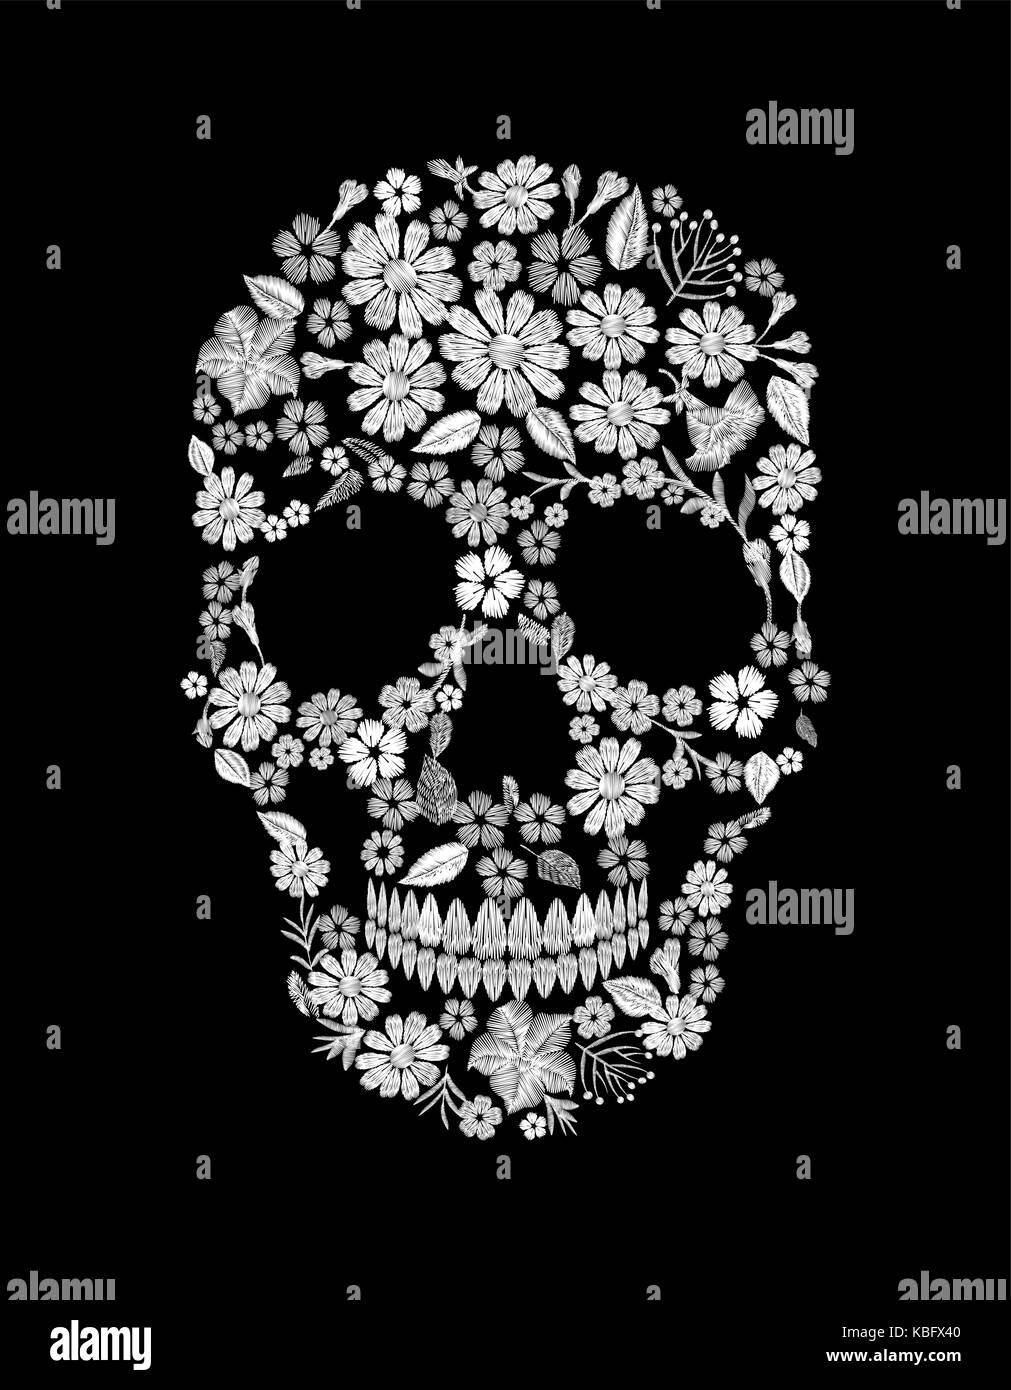 Vintage embroidered flower skull. Muertos Dead Day Fashion design decoration print. White lace marigold daisy chamomile beautiful isolated on black background. Greeting invitation vector illustration Stock Vector